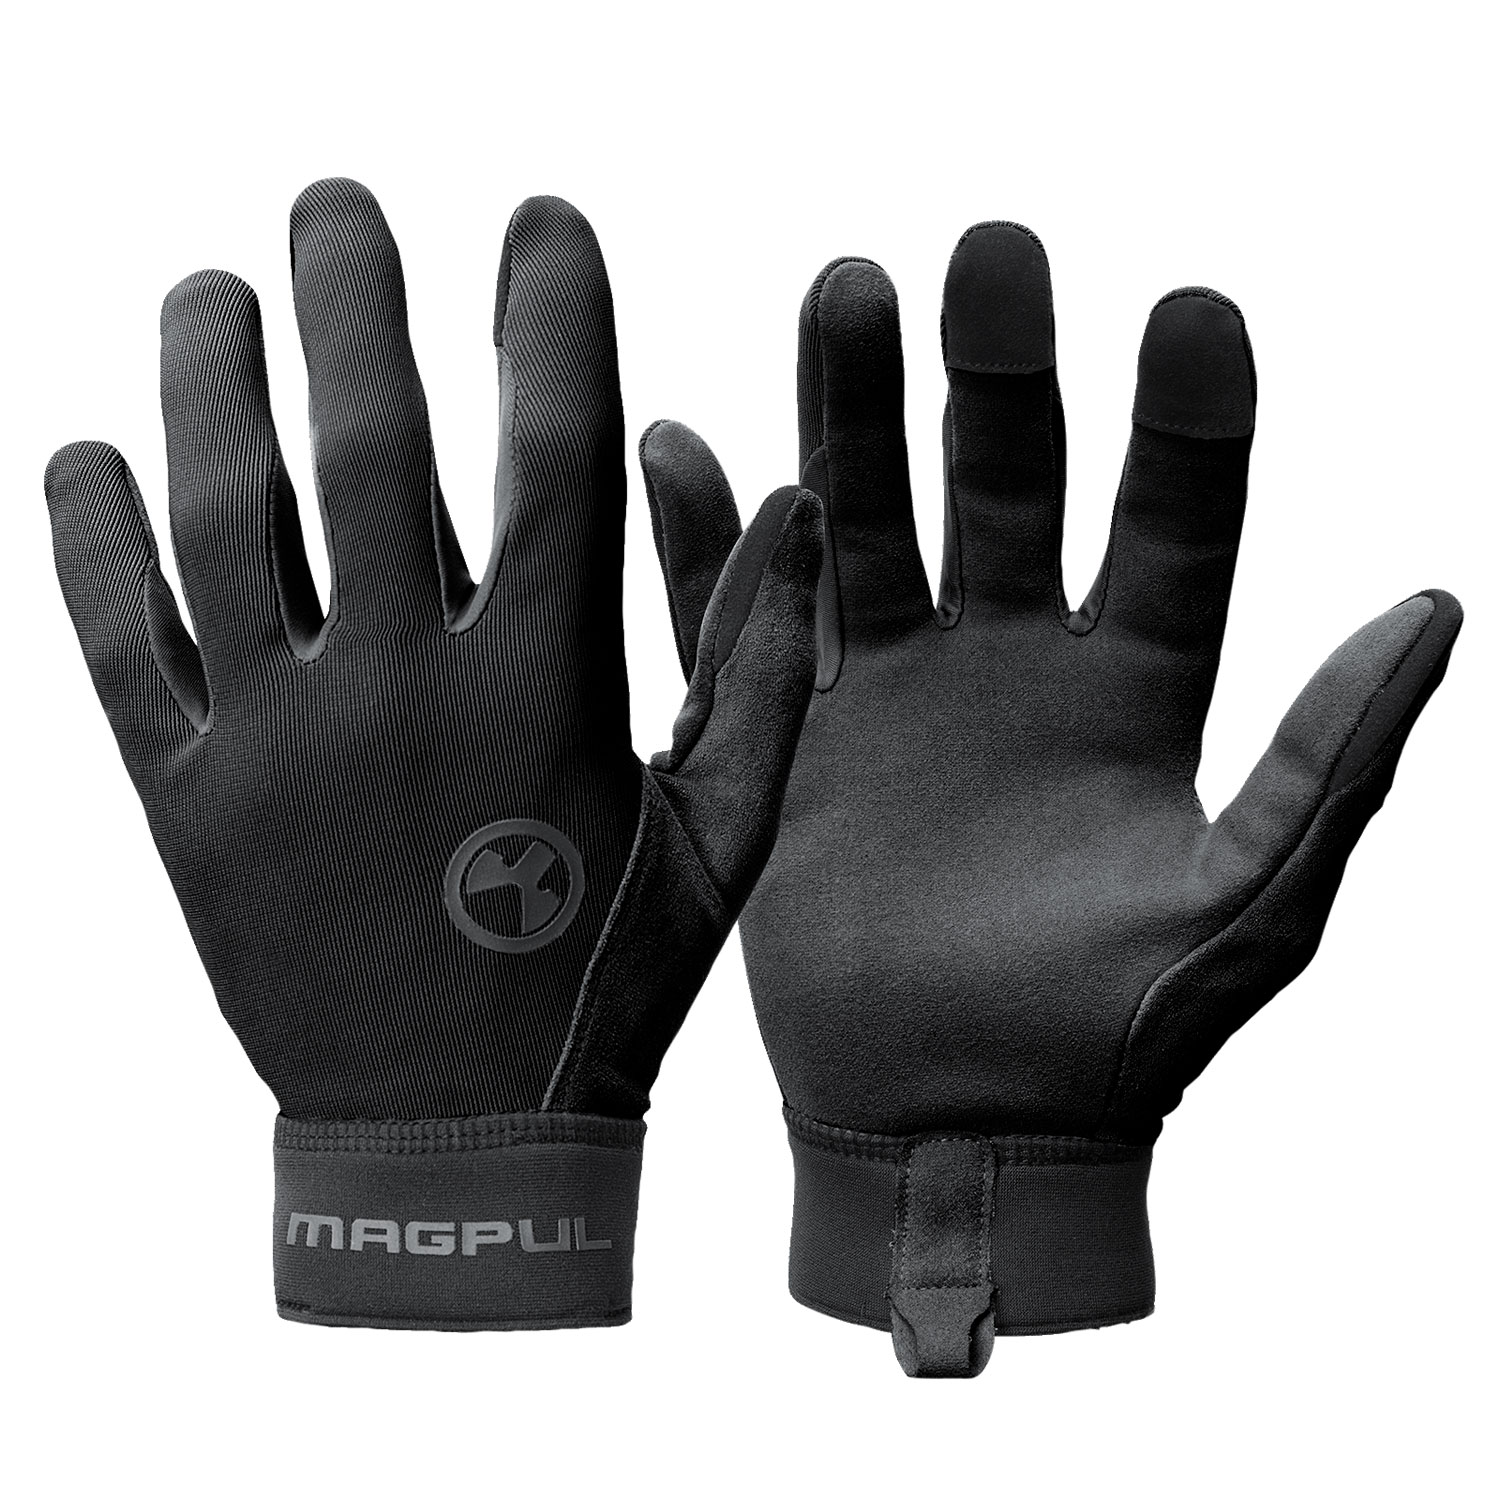 Magpul MAG1014-001 Technical 2.0 Gloves Black Touchscreen Synthetic/Suede Medium